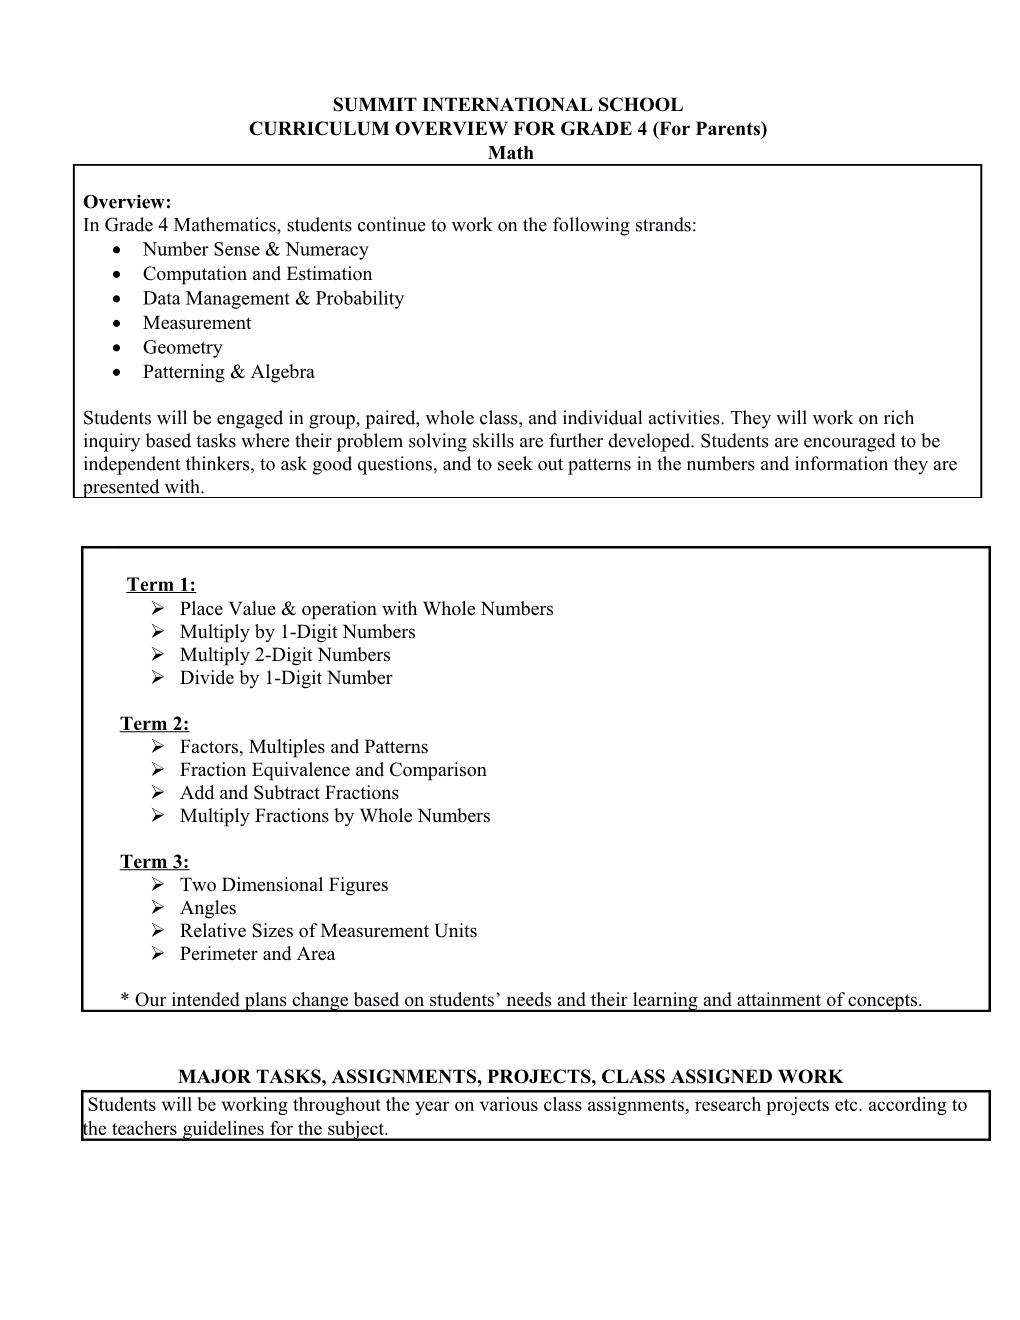 CURRICULUM OVERVIEW for GRADE 4 (For Parents)